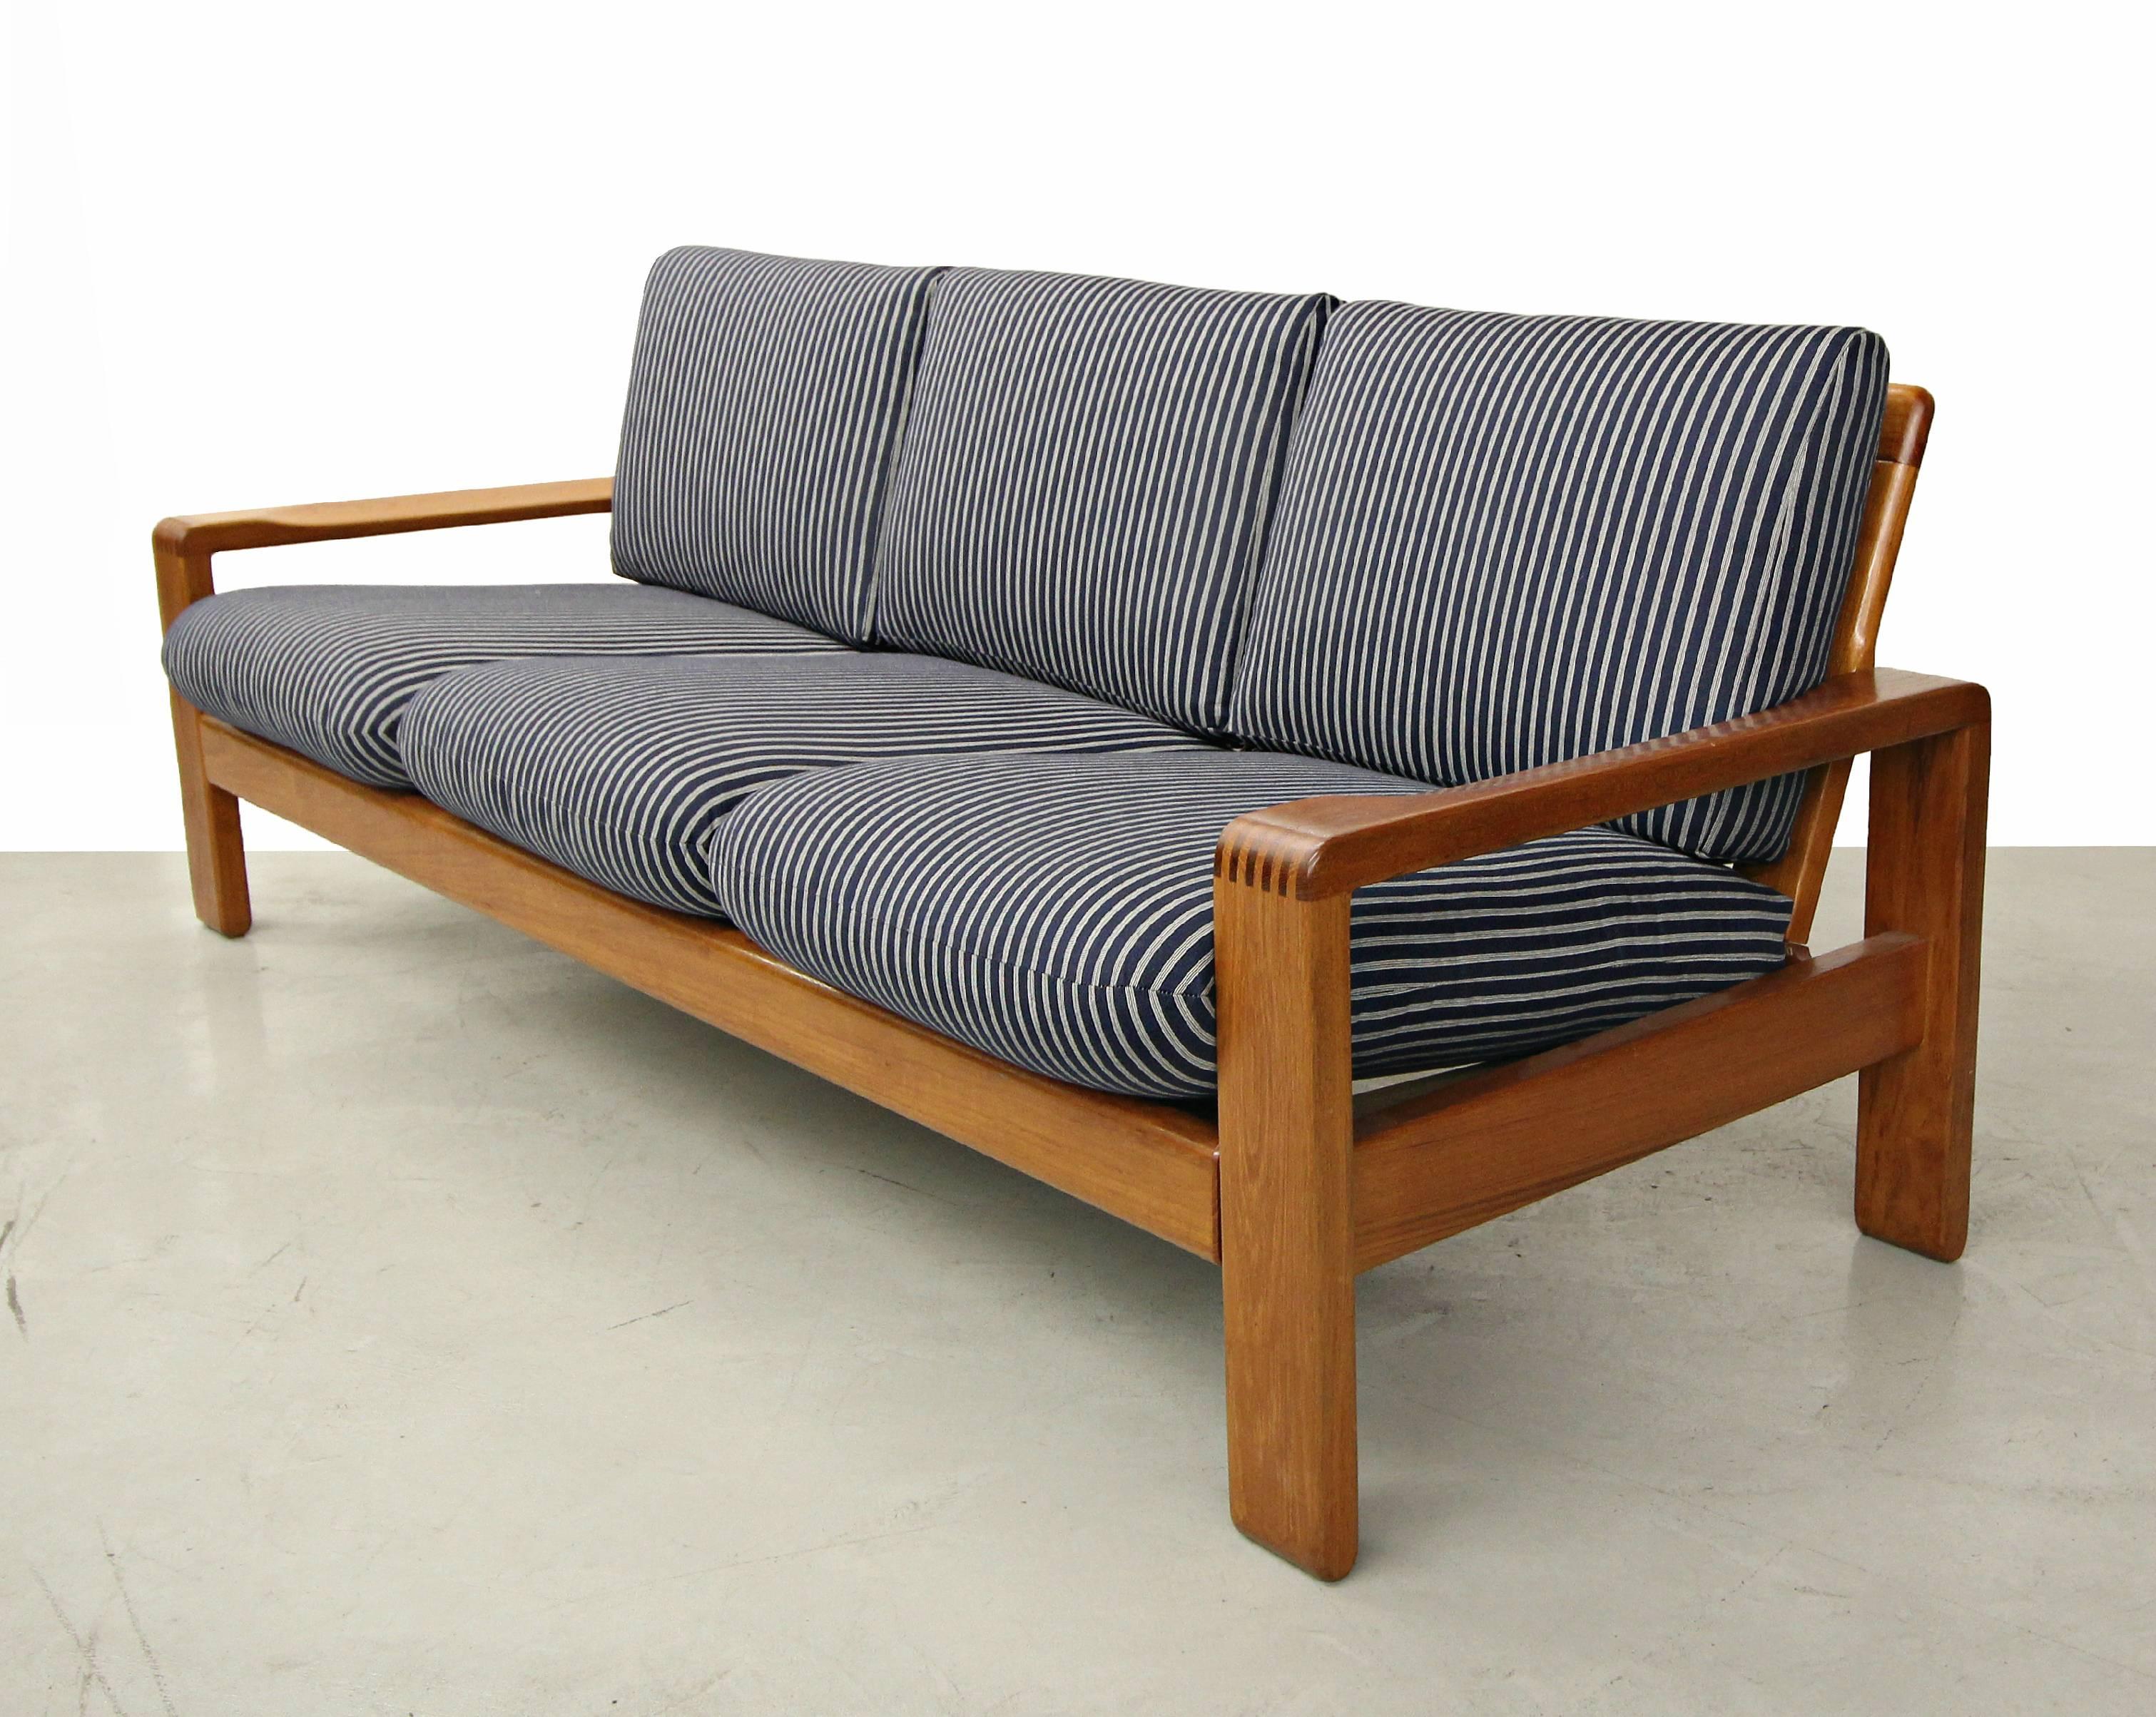 This is the classically perfect, solid teak, Danish sofa designed by HW Klein for Bramin Mobler. This is a beautifully designed sofa with gorgeous dovetail joint details and an open slatted back. This sofa is quite substantial and weighty in